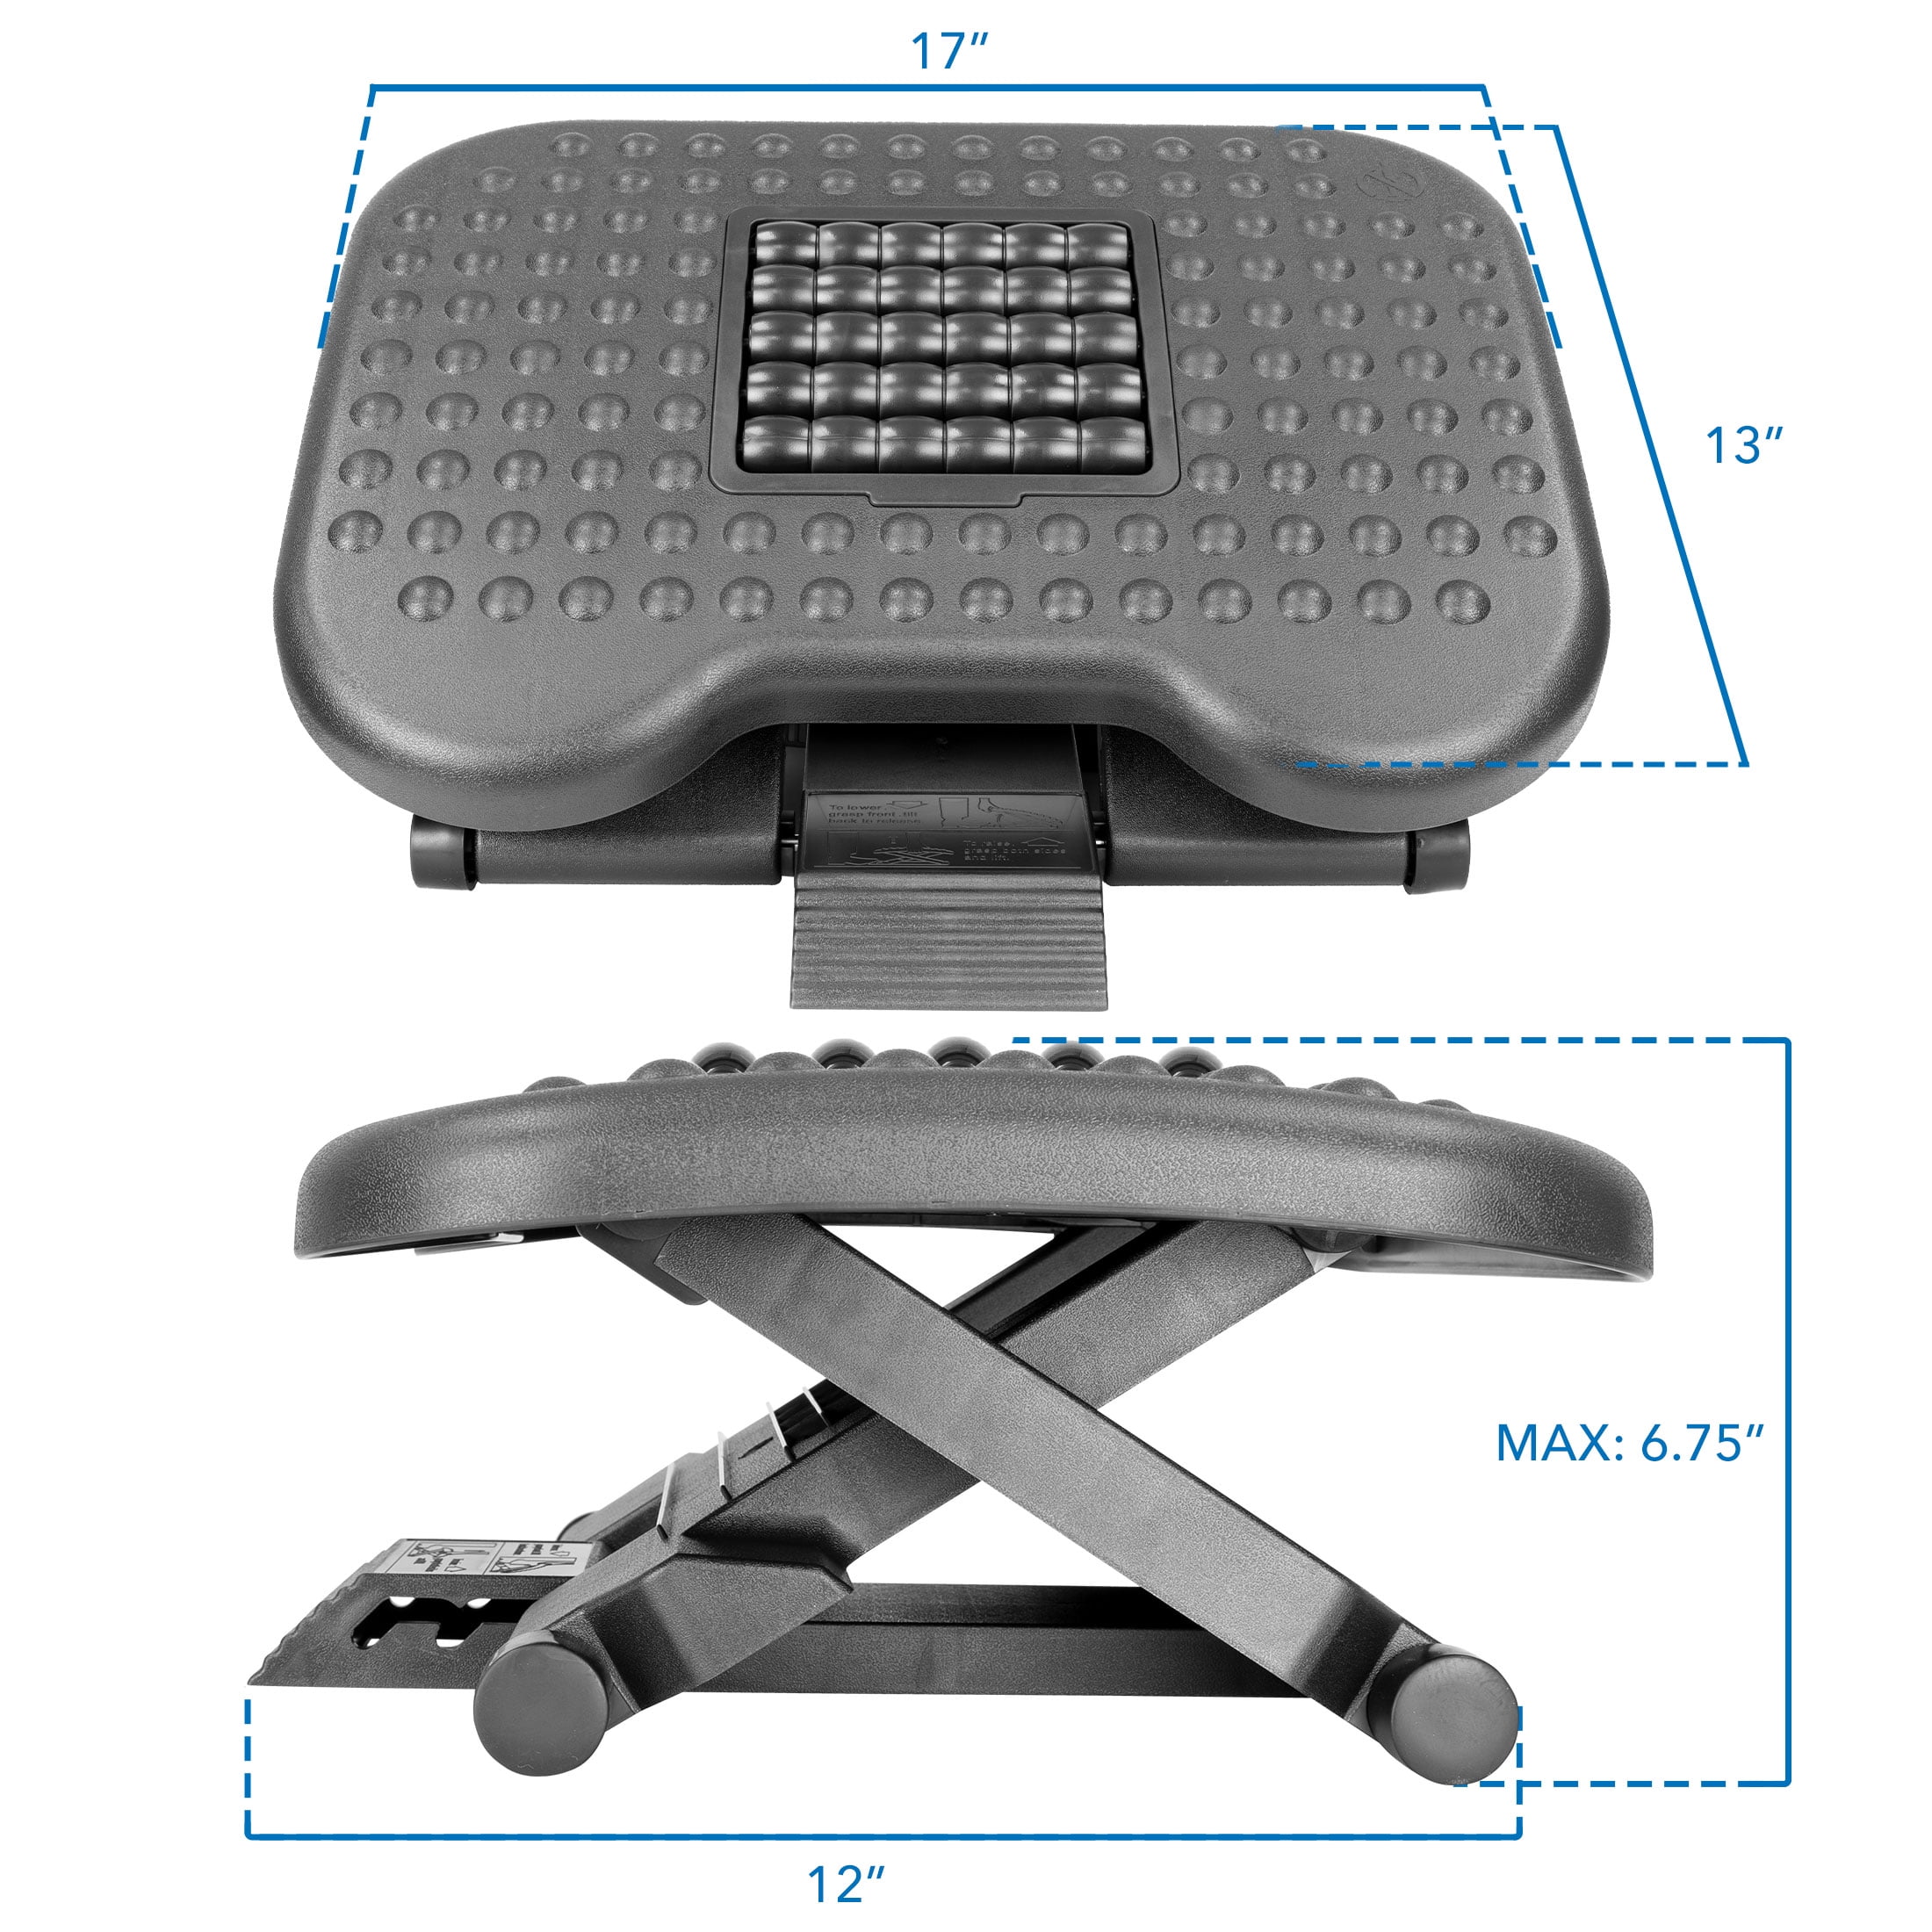 Mount-It! Ergonomic Under Desk Footrest with 3 Height Levels |Height  Adjustable Tilting Foot Stool | Home Office Footrest with Massage Surface  for